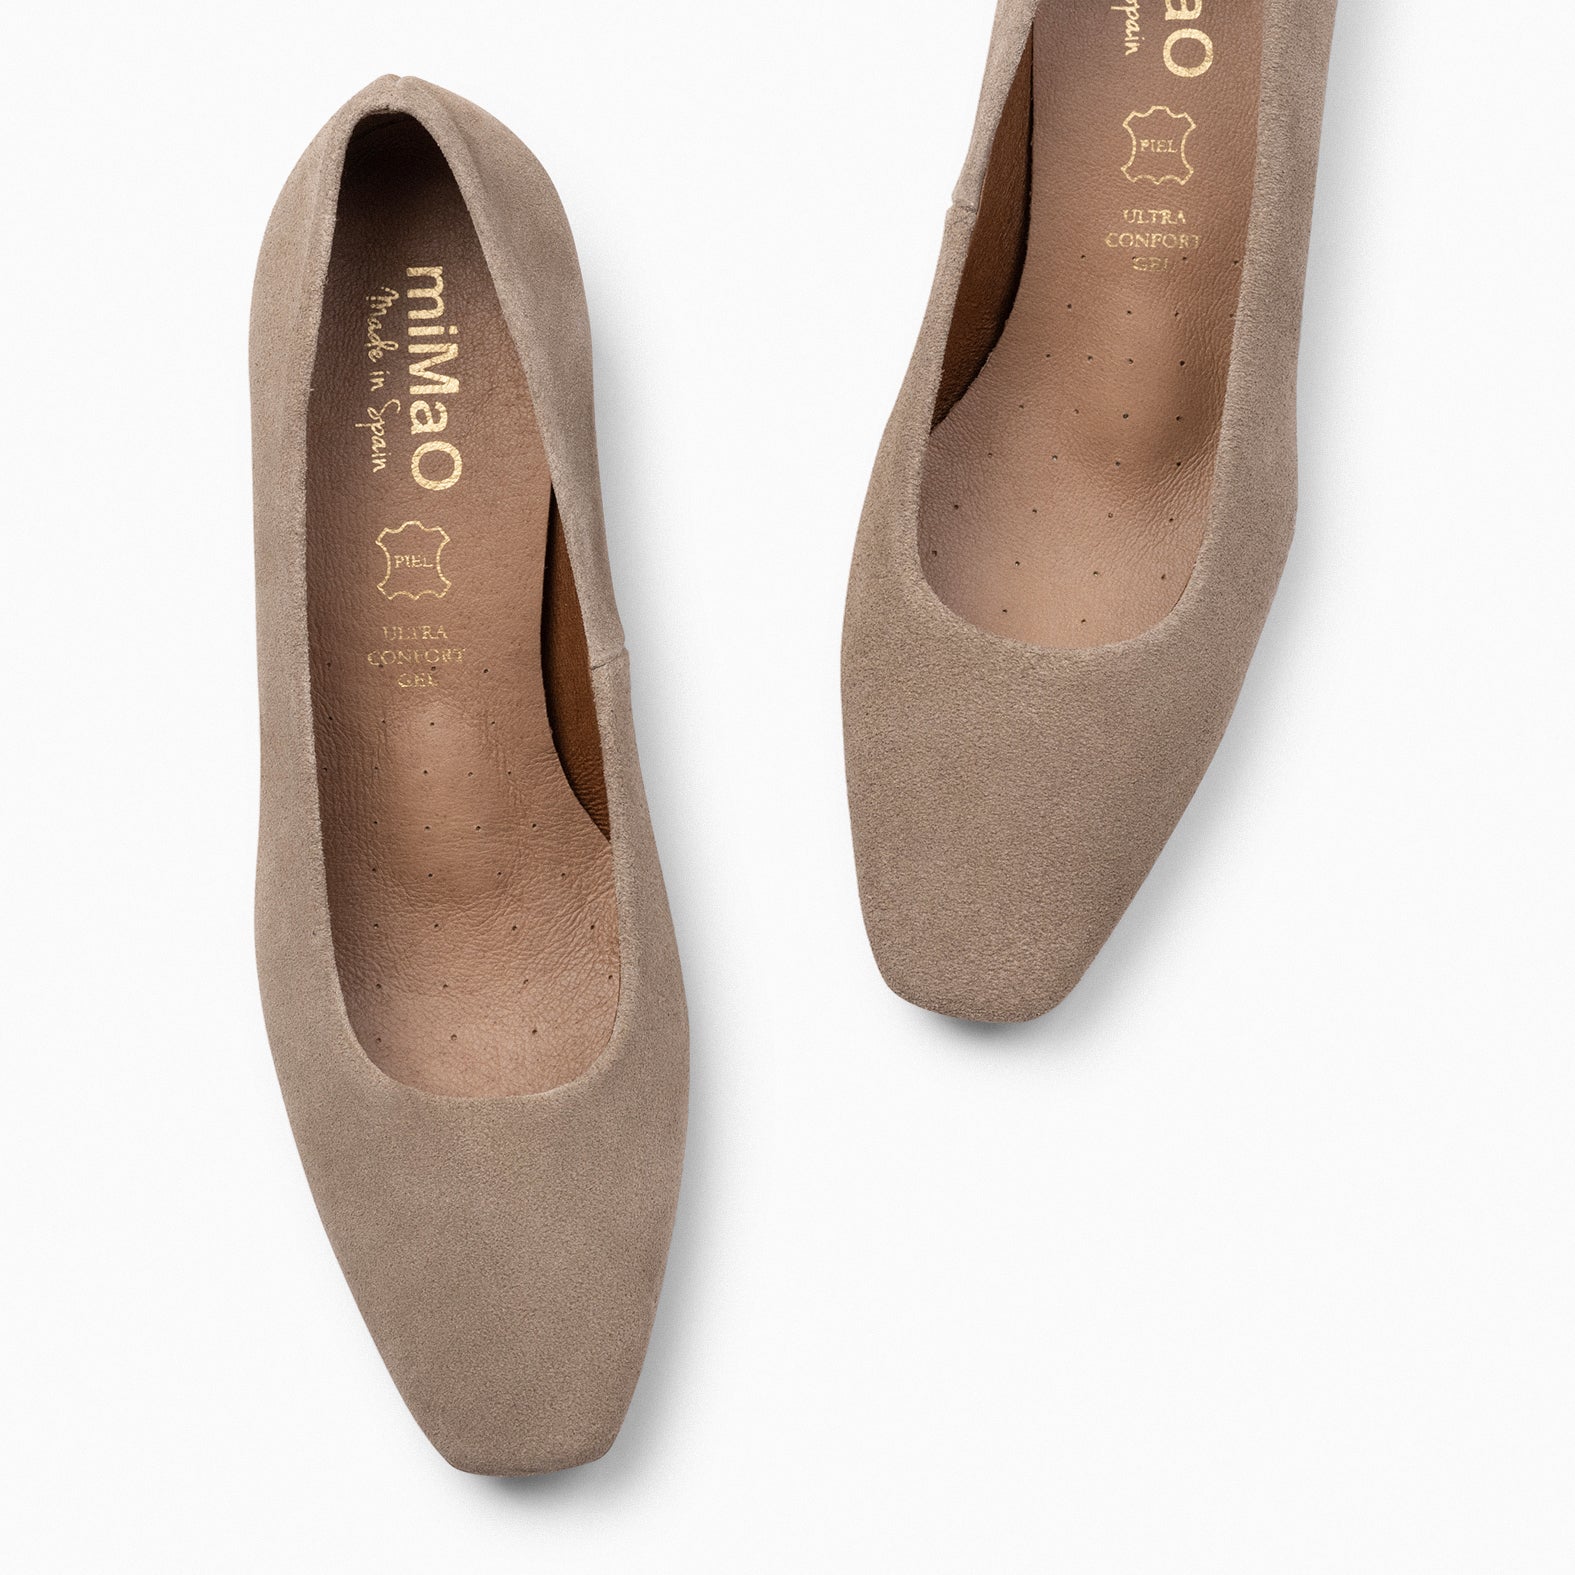 URBAN LADY – TAUPE suede leather low heels 